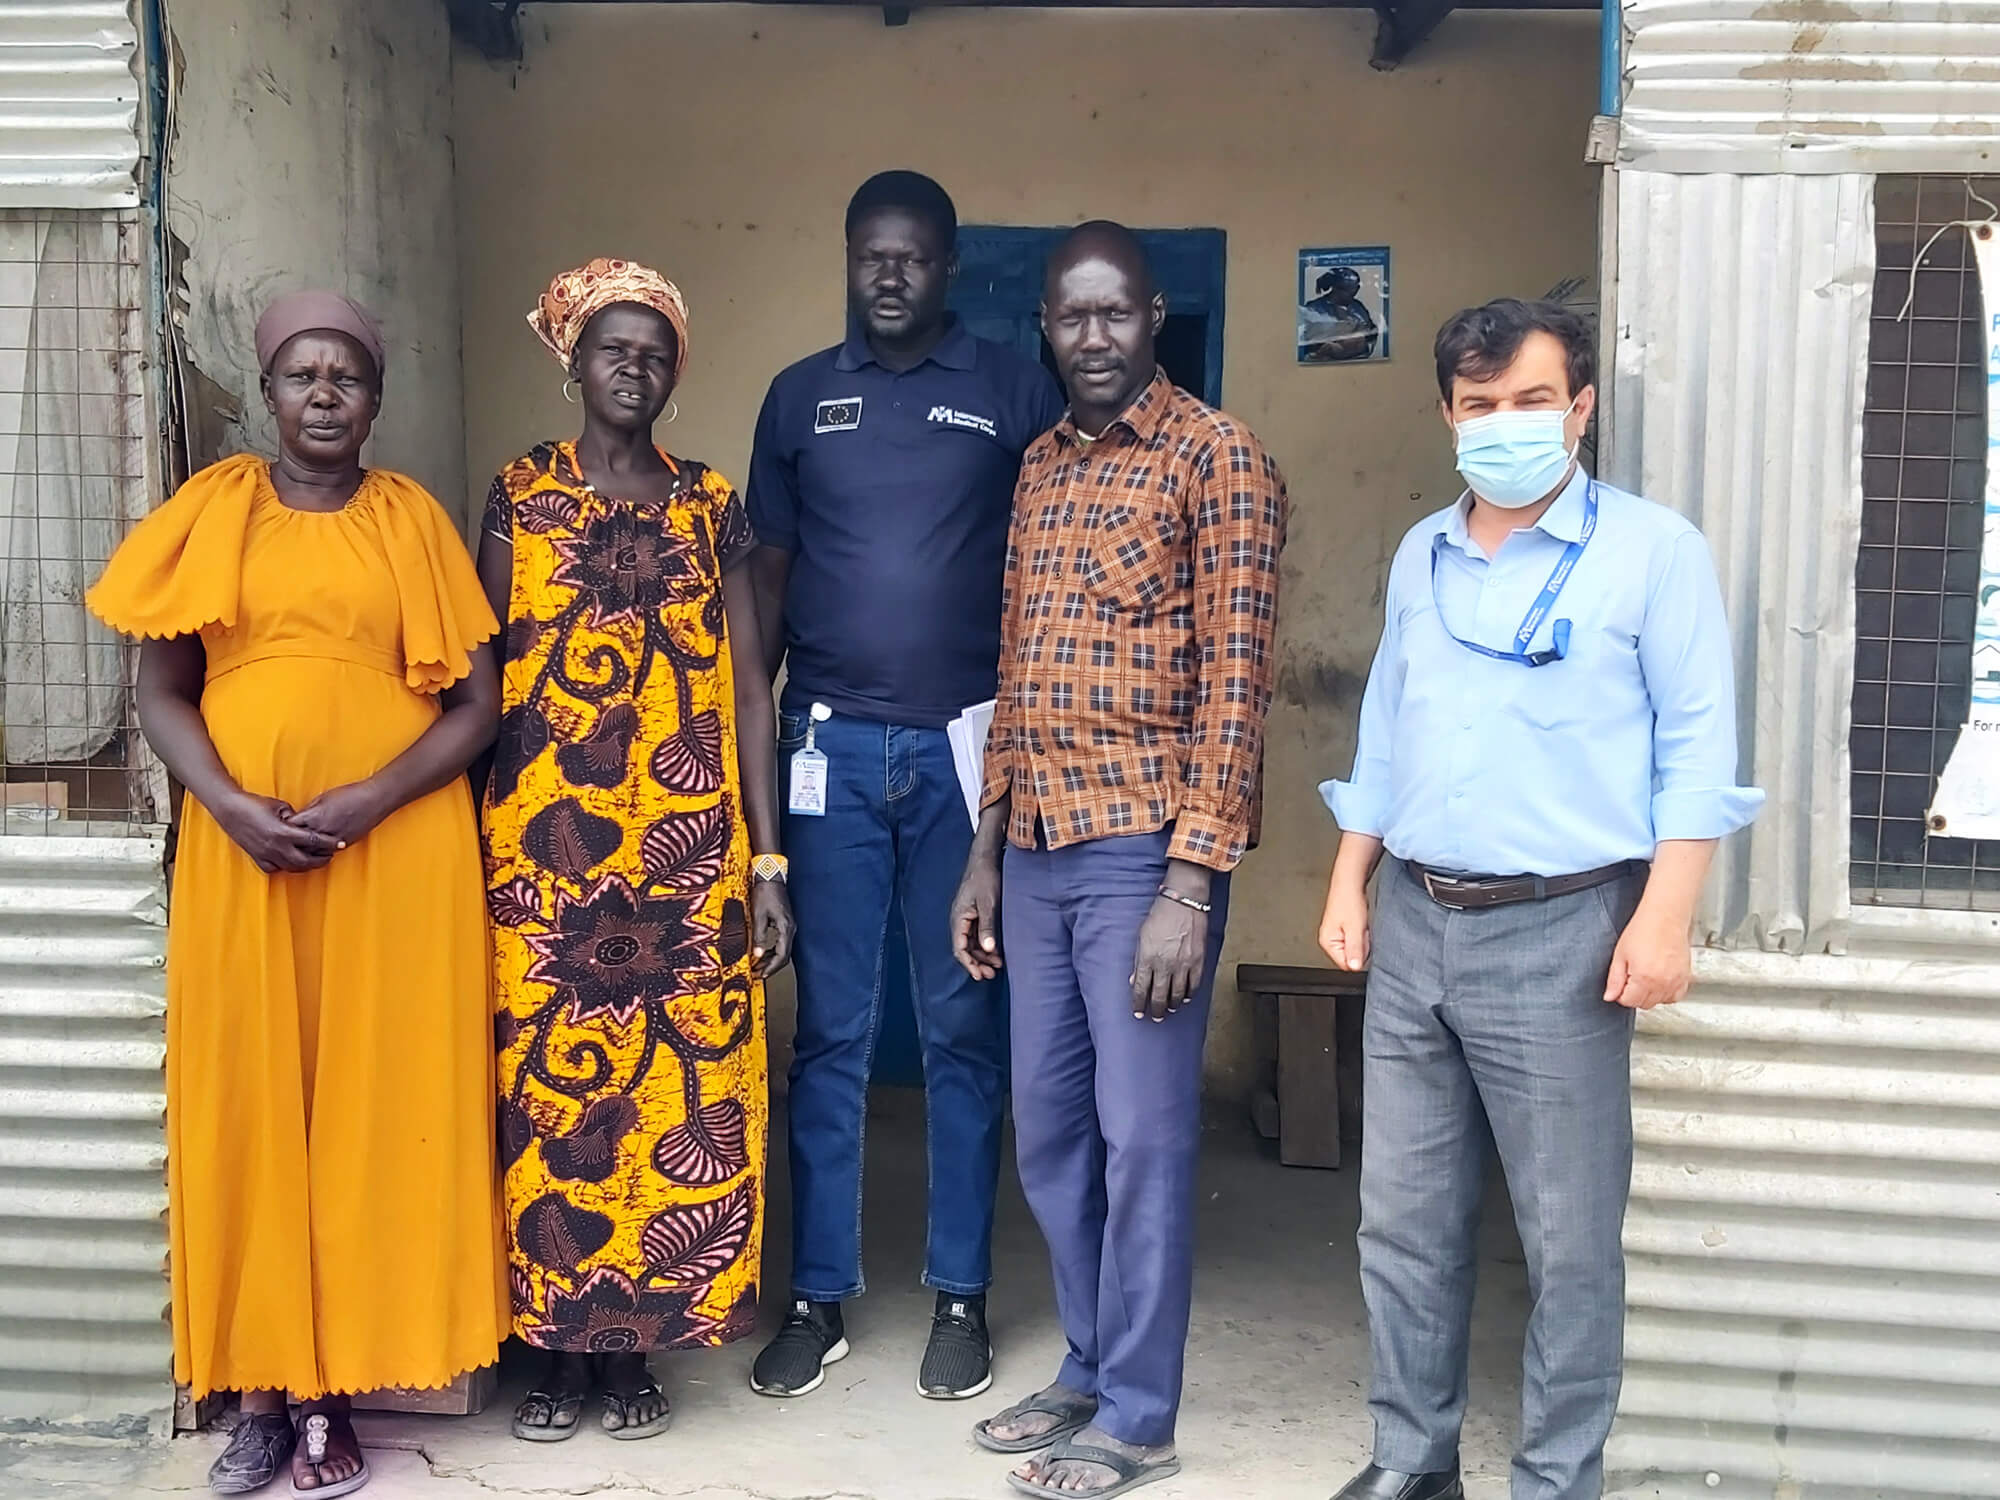 Dr. Ebadullah Hedayat meets with staff members at an International Medical Corps-supported health facility in Panyikang County.